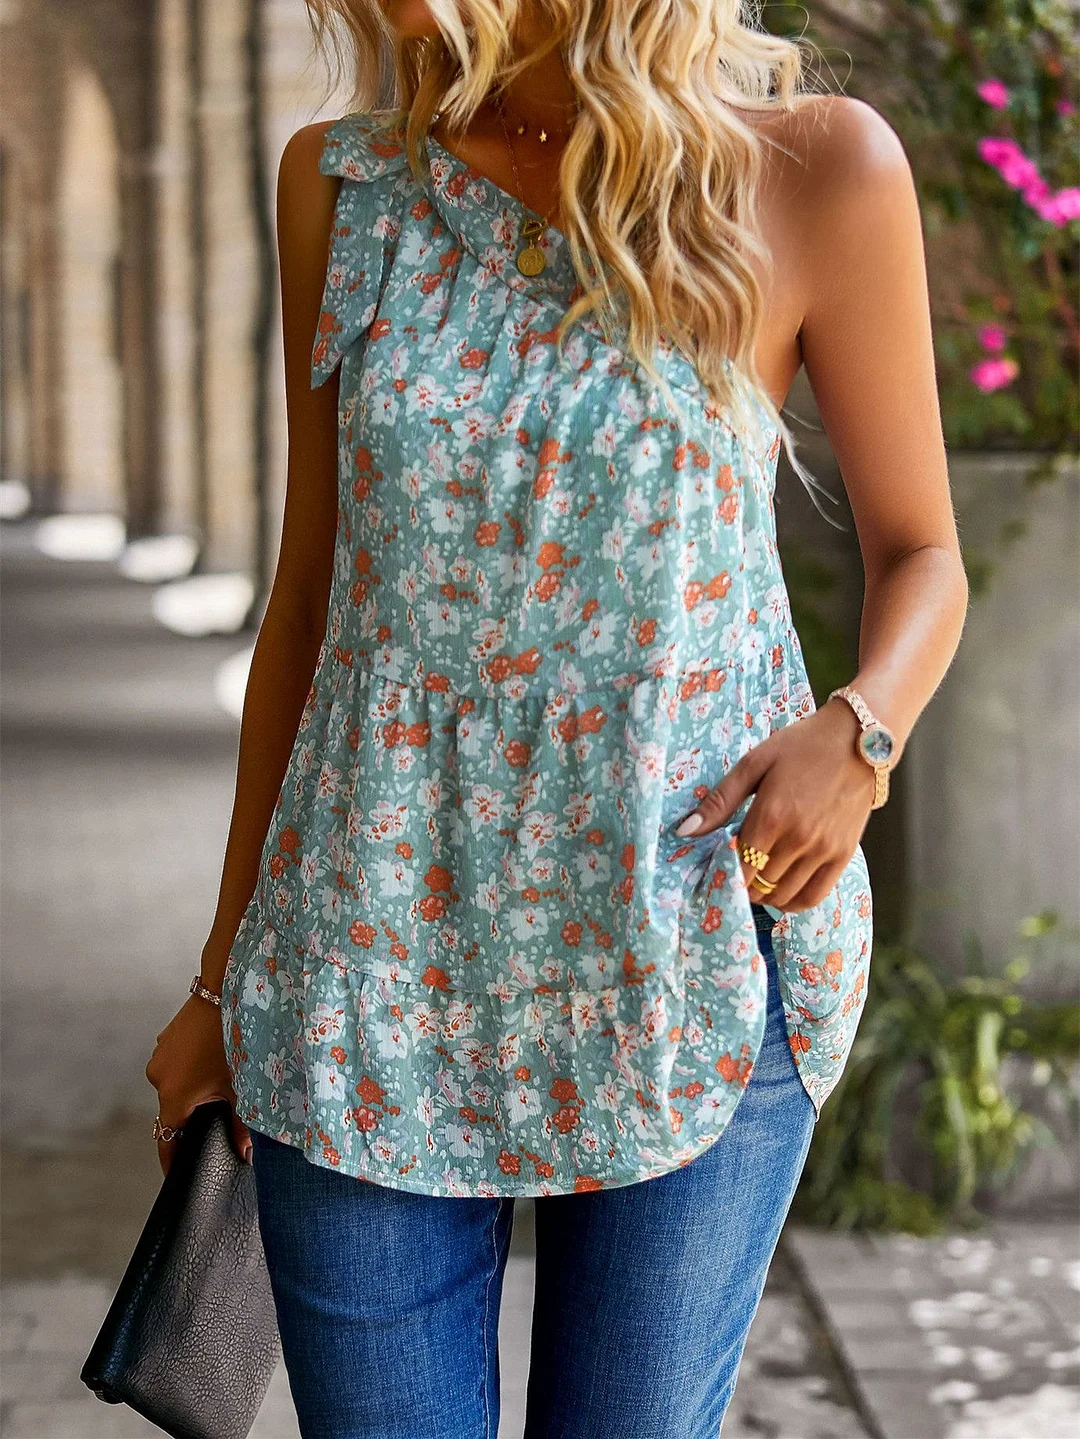 Women plus size clothing Women's Summer Sleeveless One Shoulder Floral Print Casual Top-Nordswear